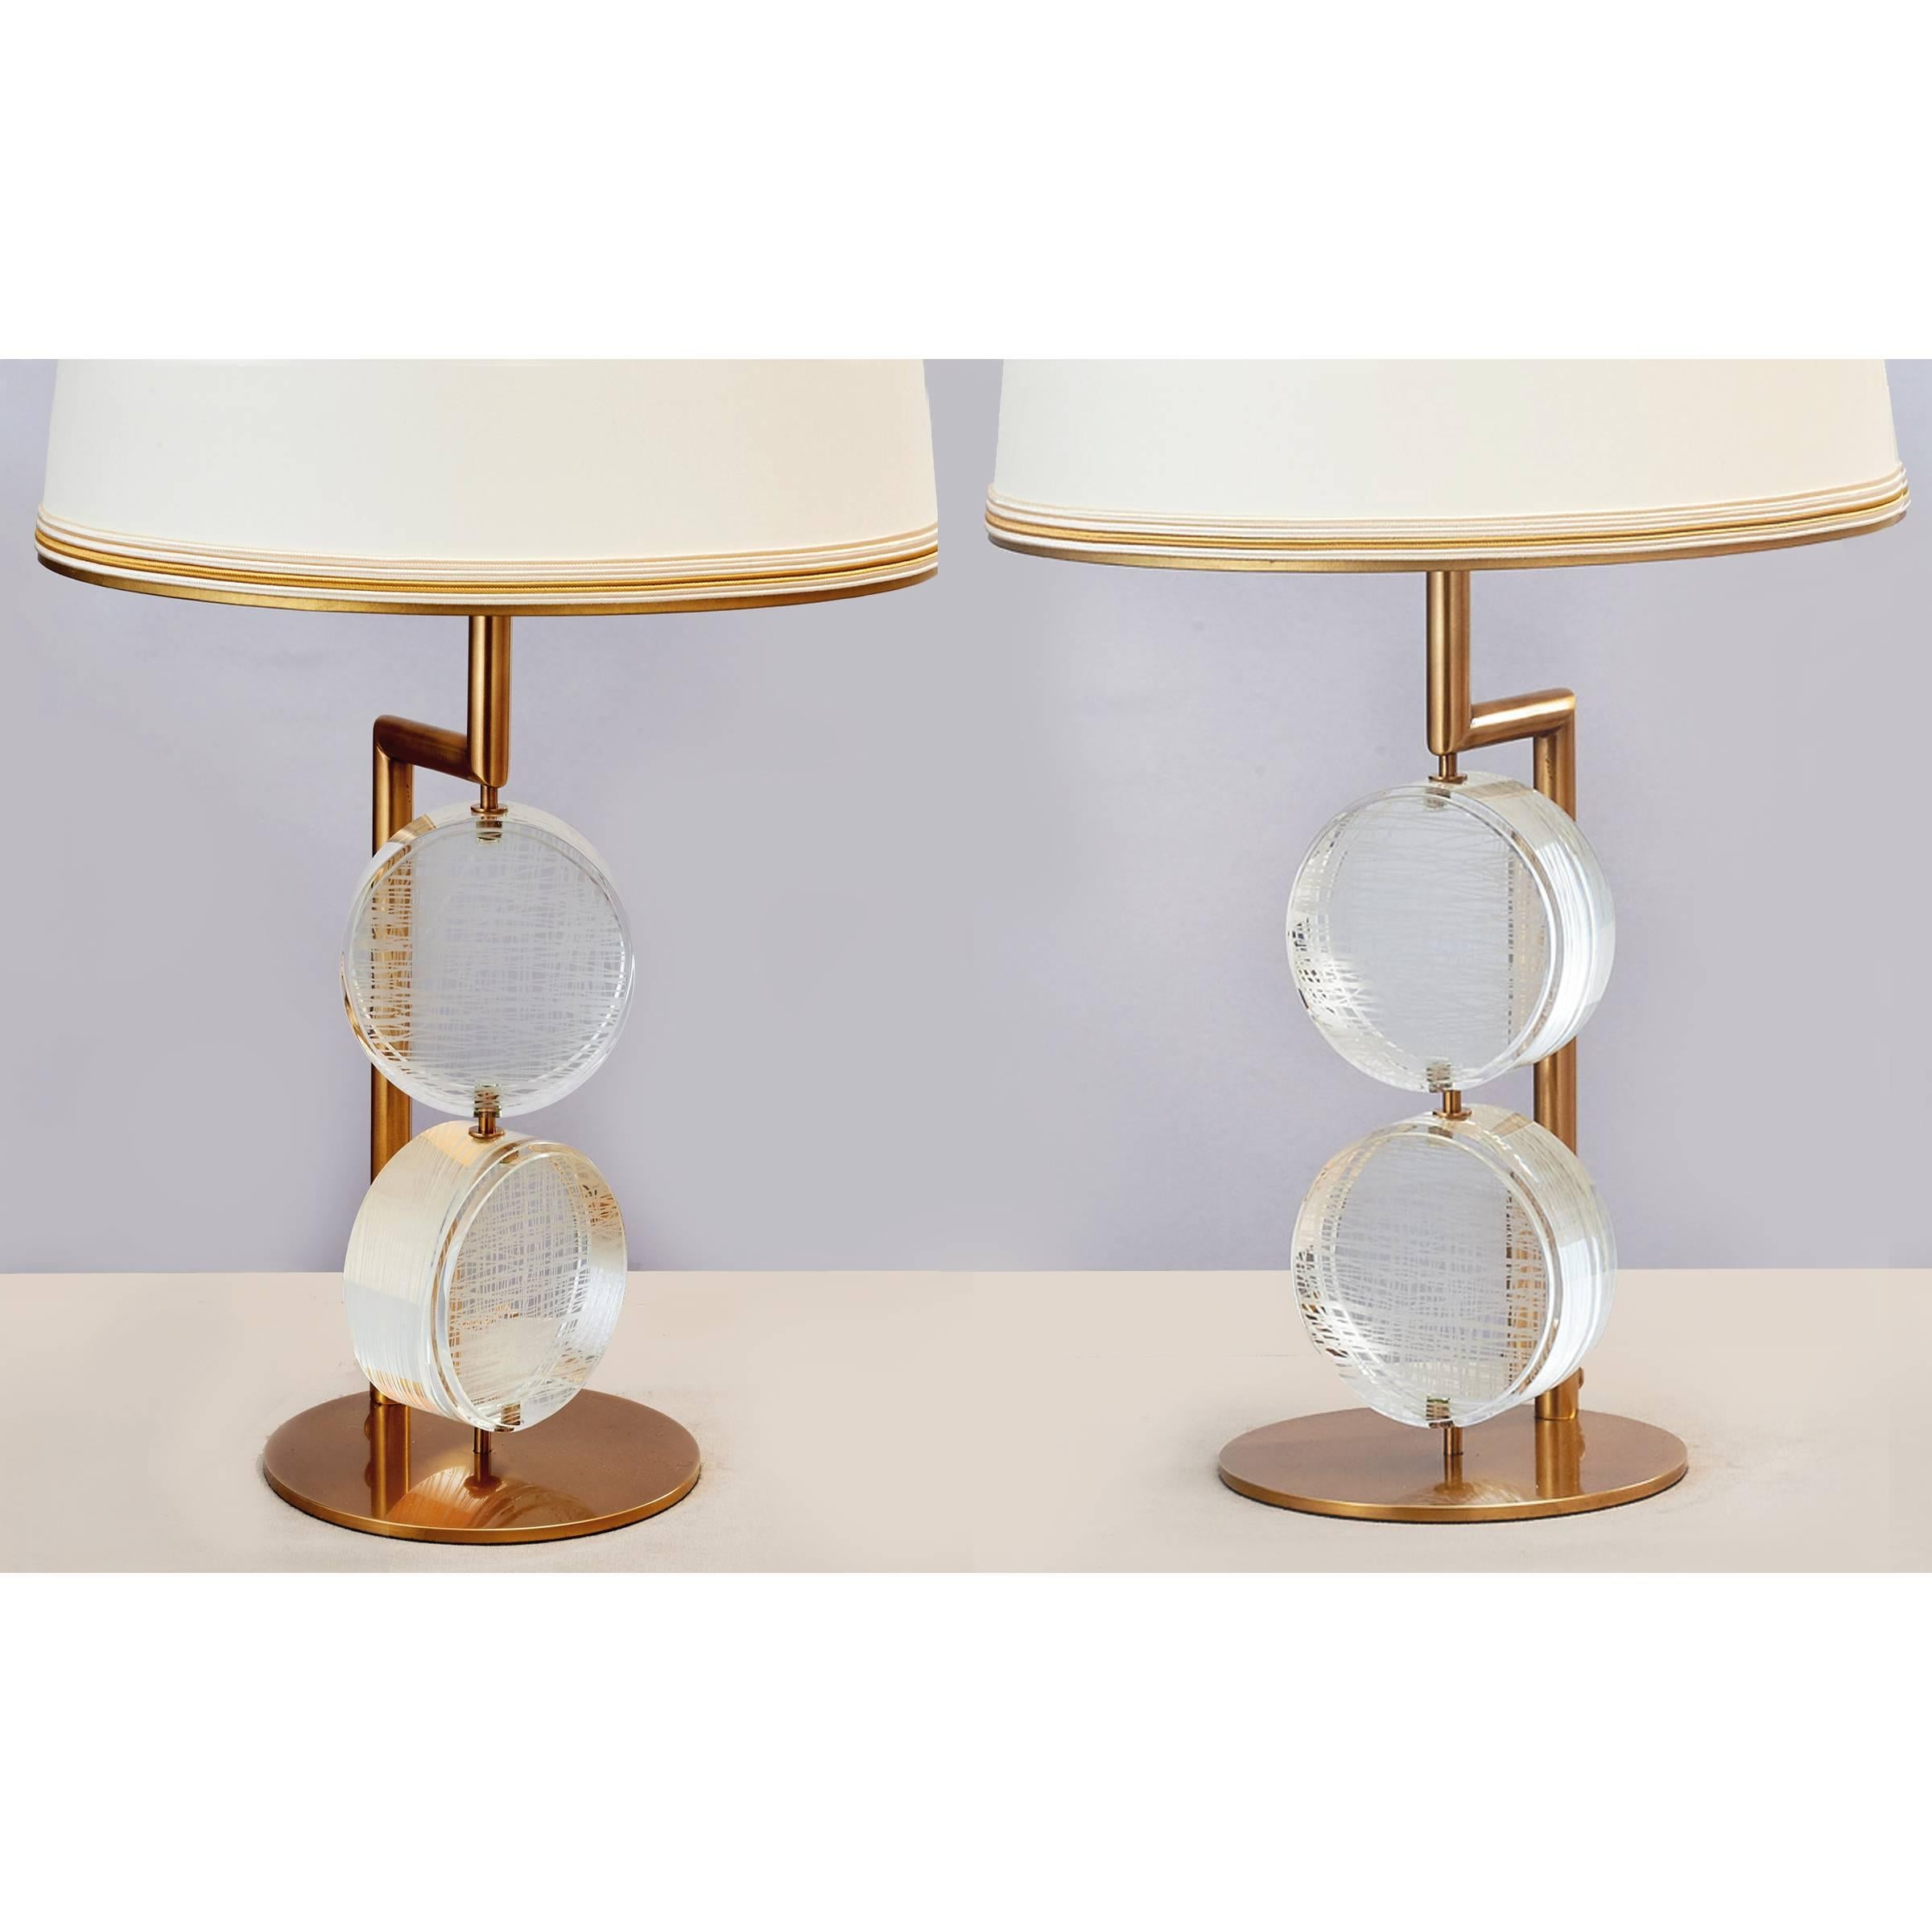 Limited Edition Pair of Etched Glass Lamps by Roberto Rida 1